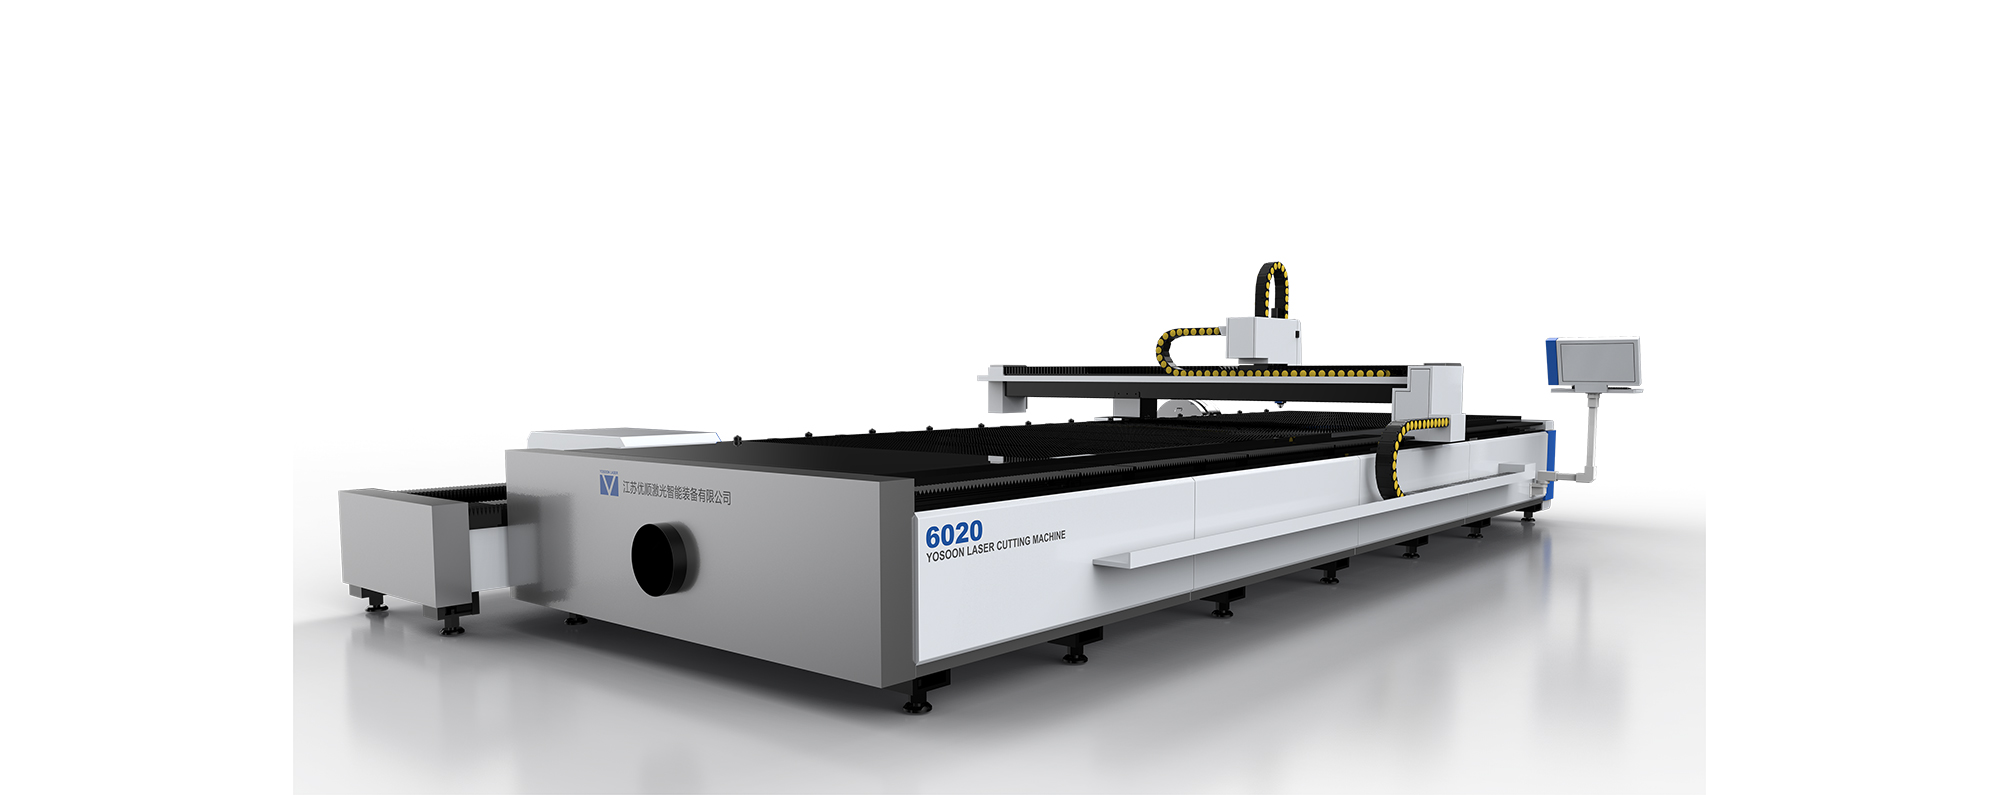 Why choose regular manufacturers when purchasing Plate and tube integrated laser cutting machine